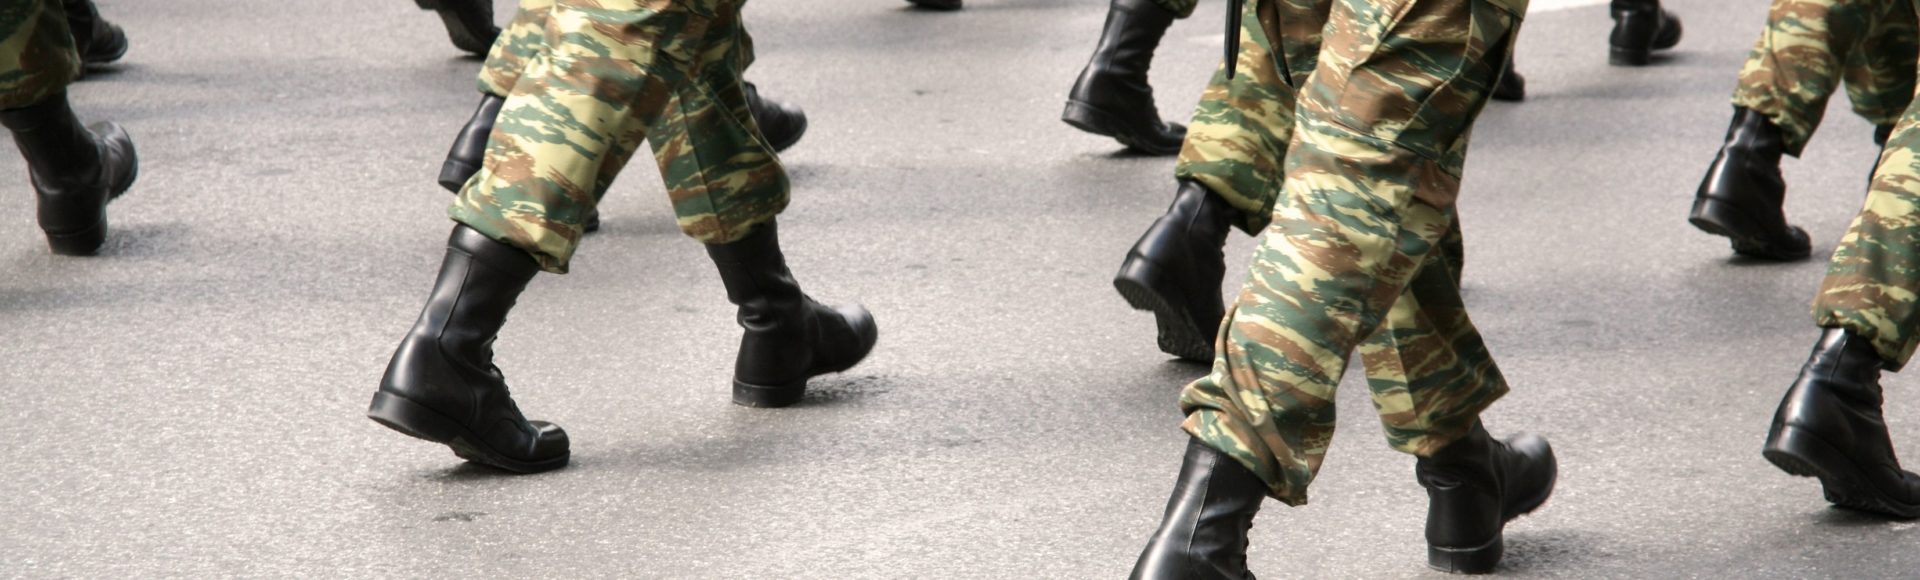 Soldiers marching, zoomed in on their boots moving in unison